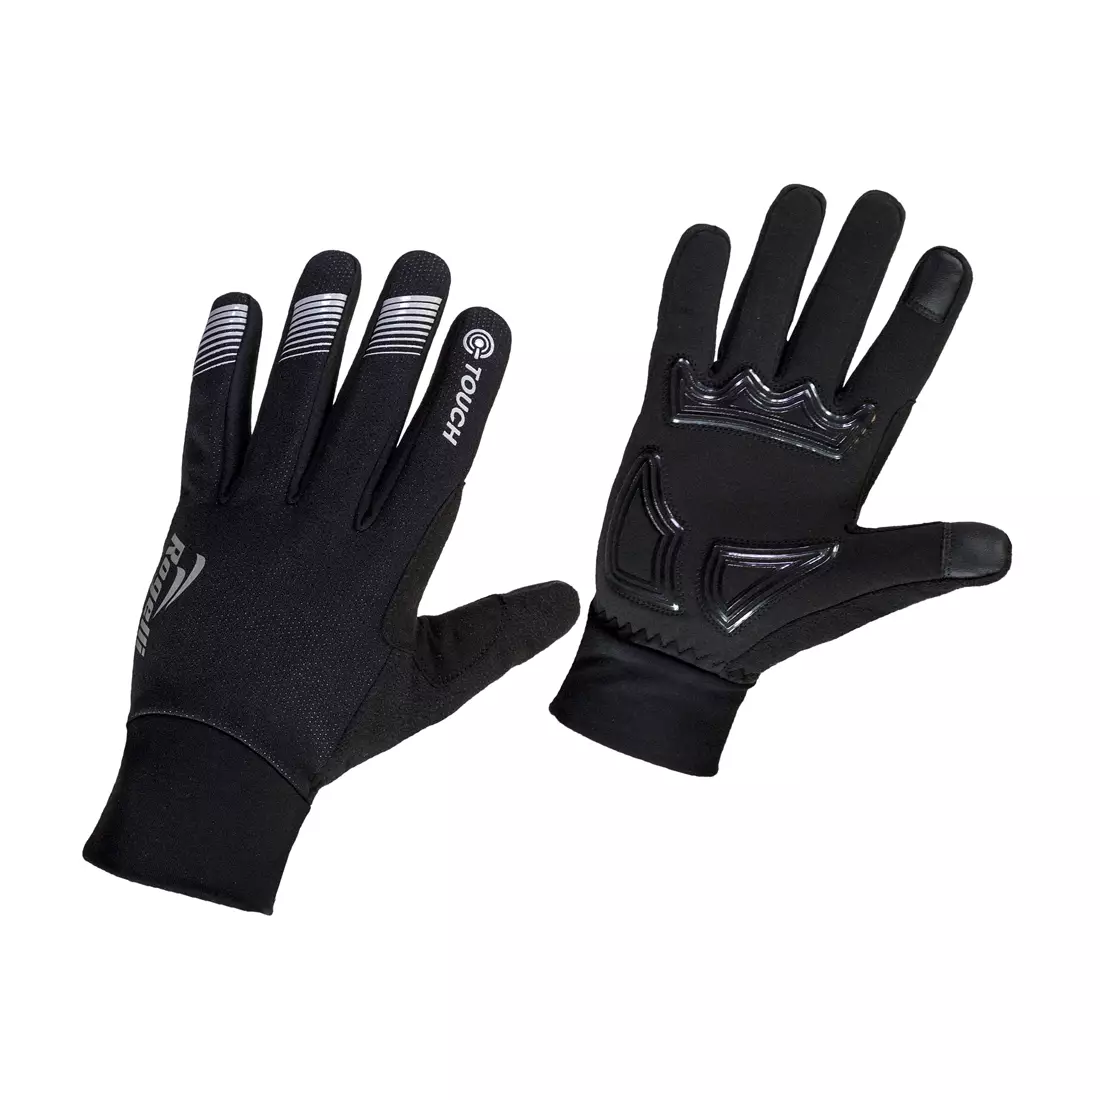 ROGELLI winter cycling gloves TOCCA, black